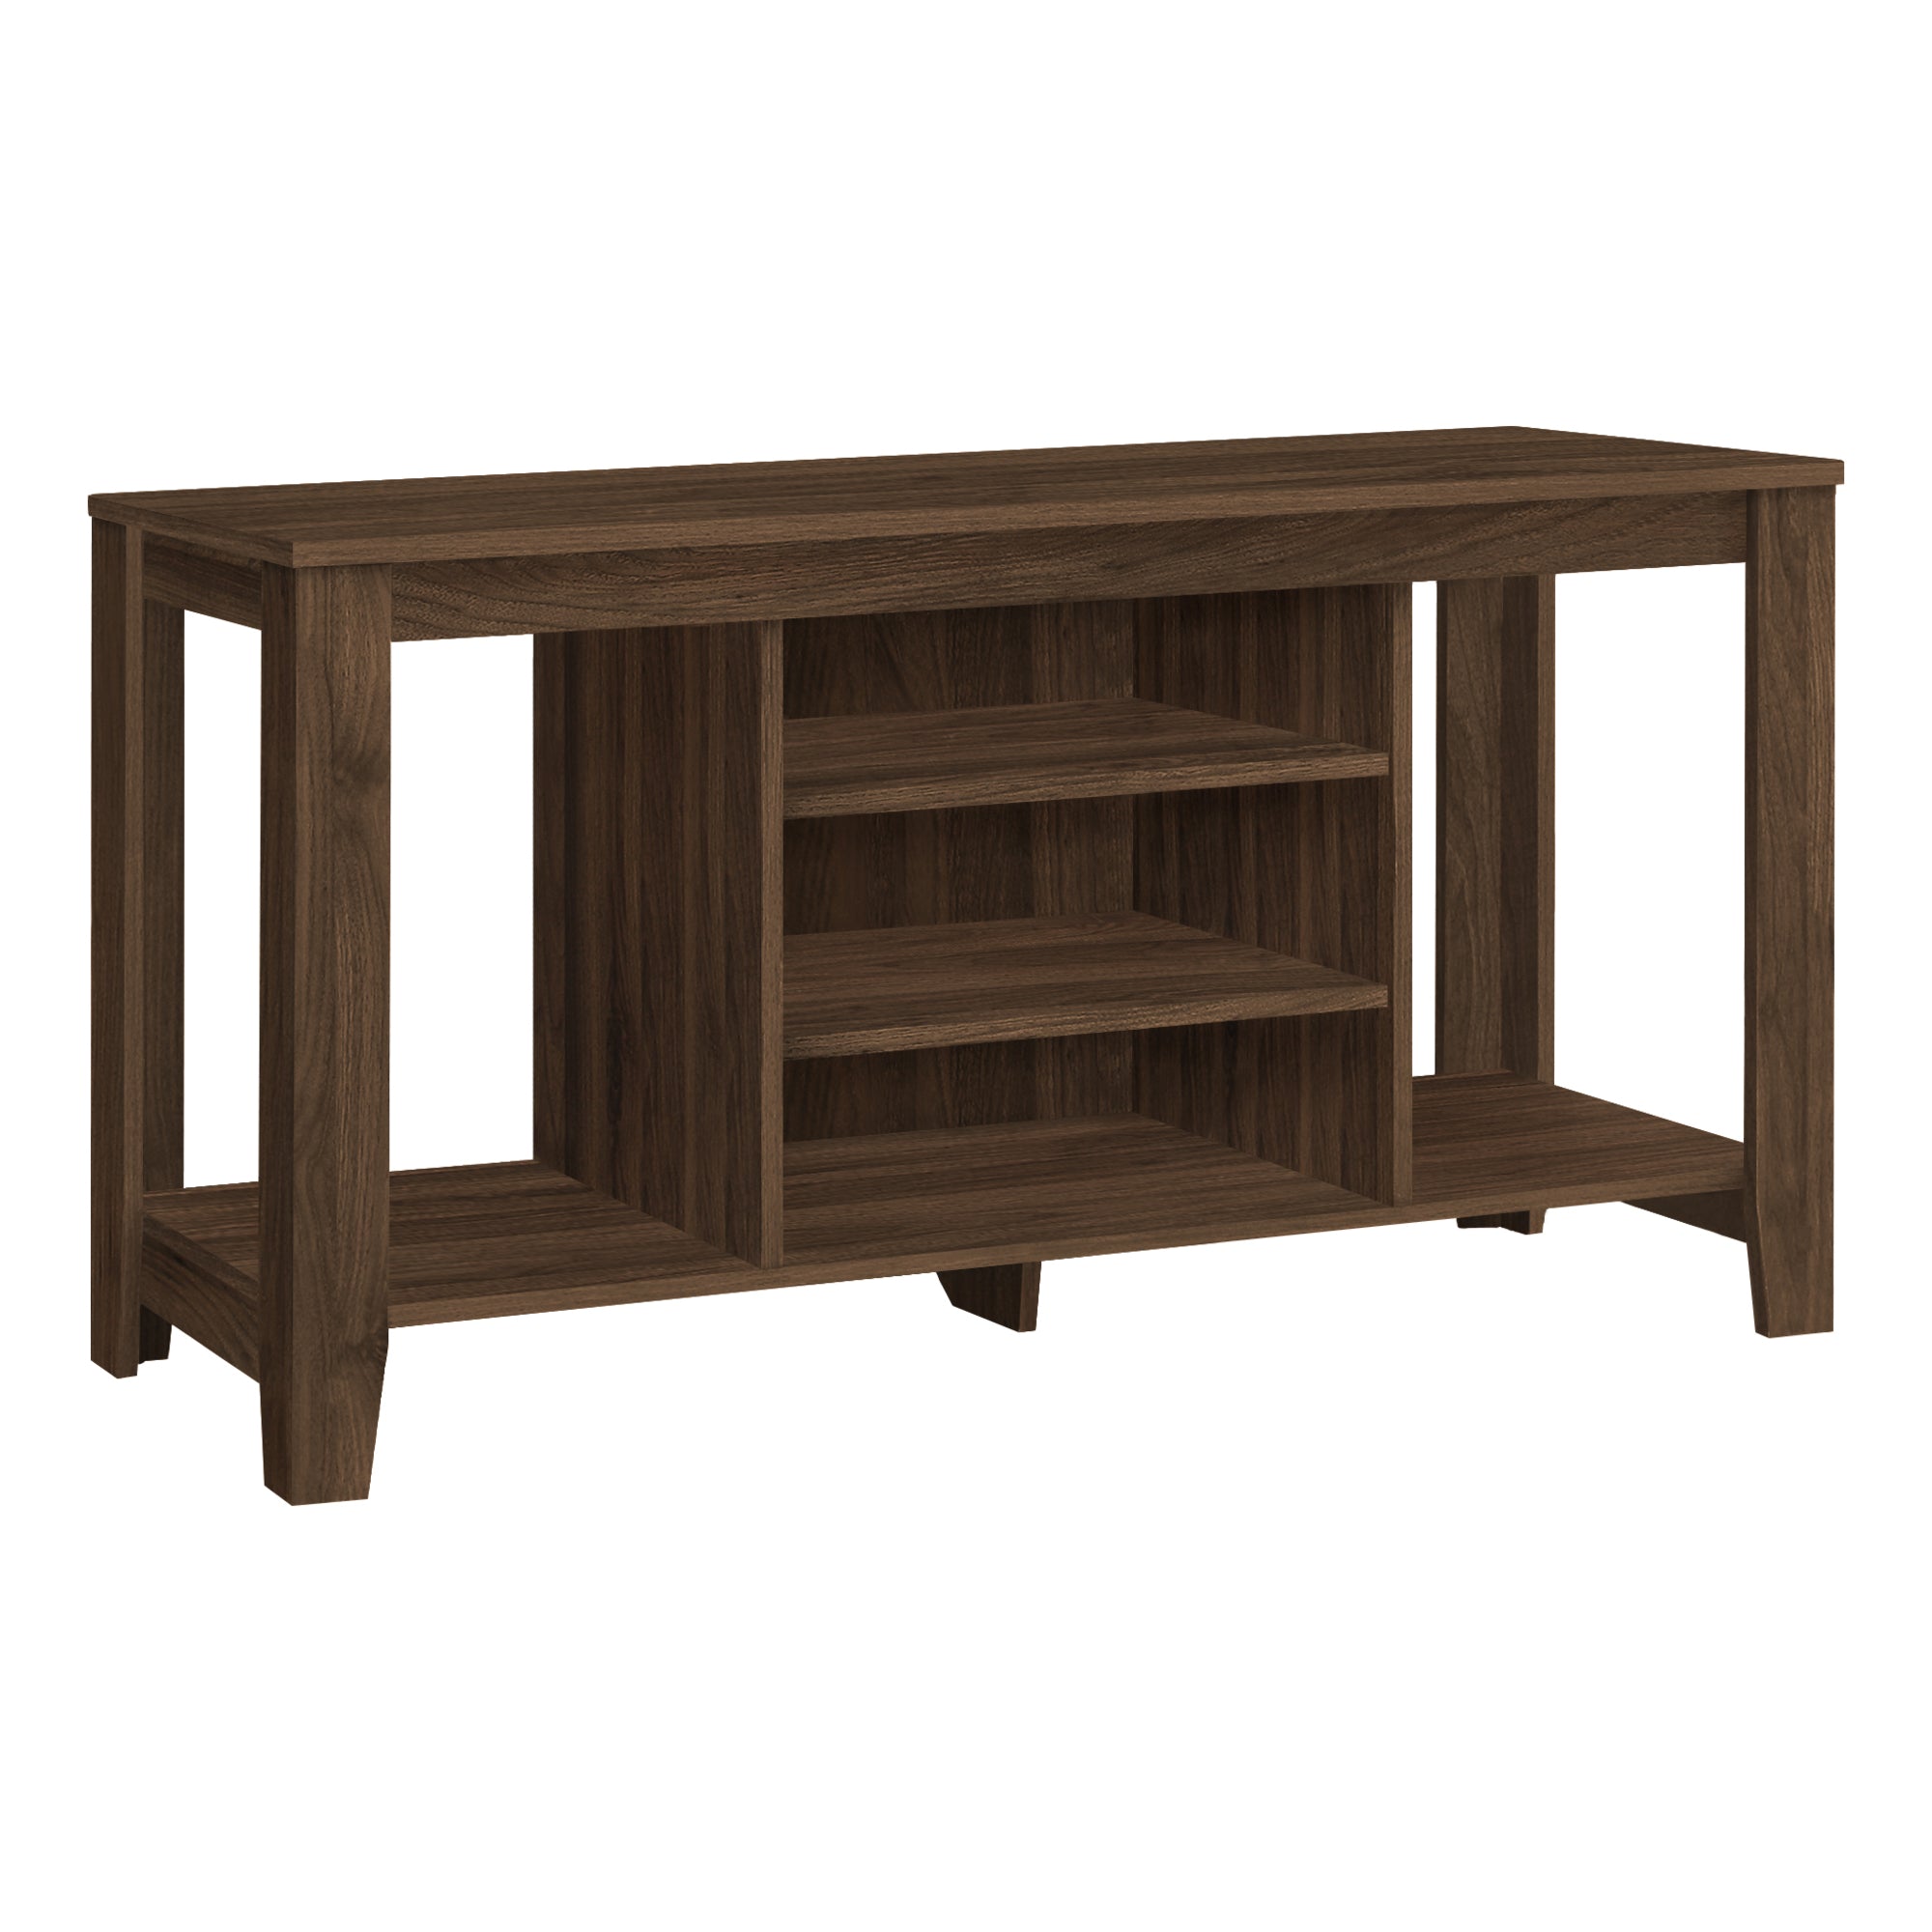 MN-343566    Tv Stand, 48 Inch, Console, Media Entertainment Center, Storage Cabinet, Living Room, Bedroom, Laminate, Walnut, Contemporary, Modern